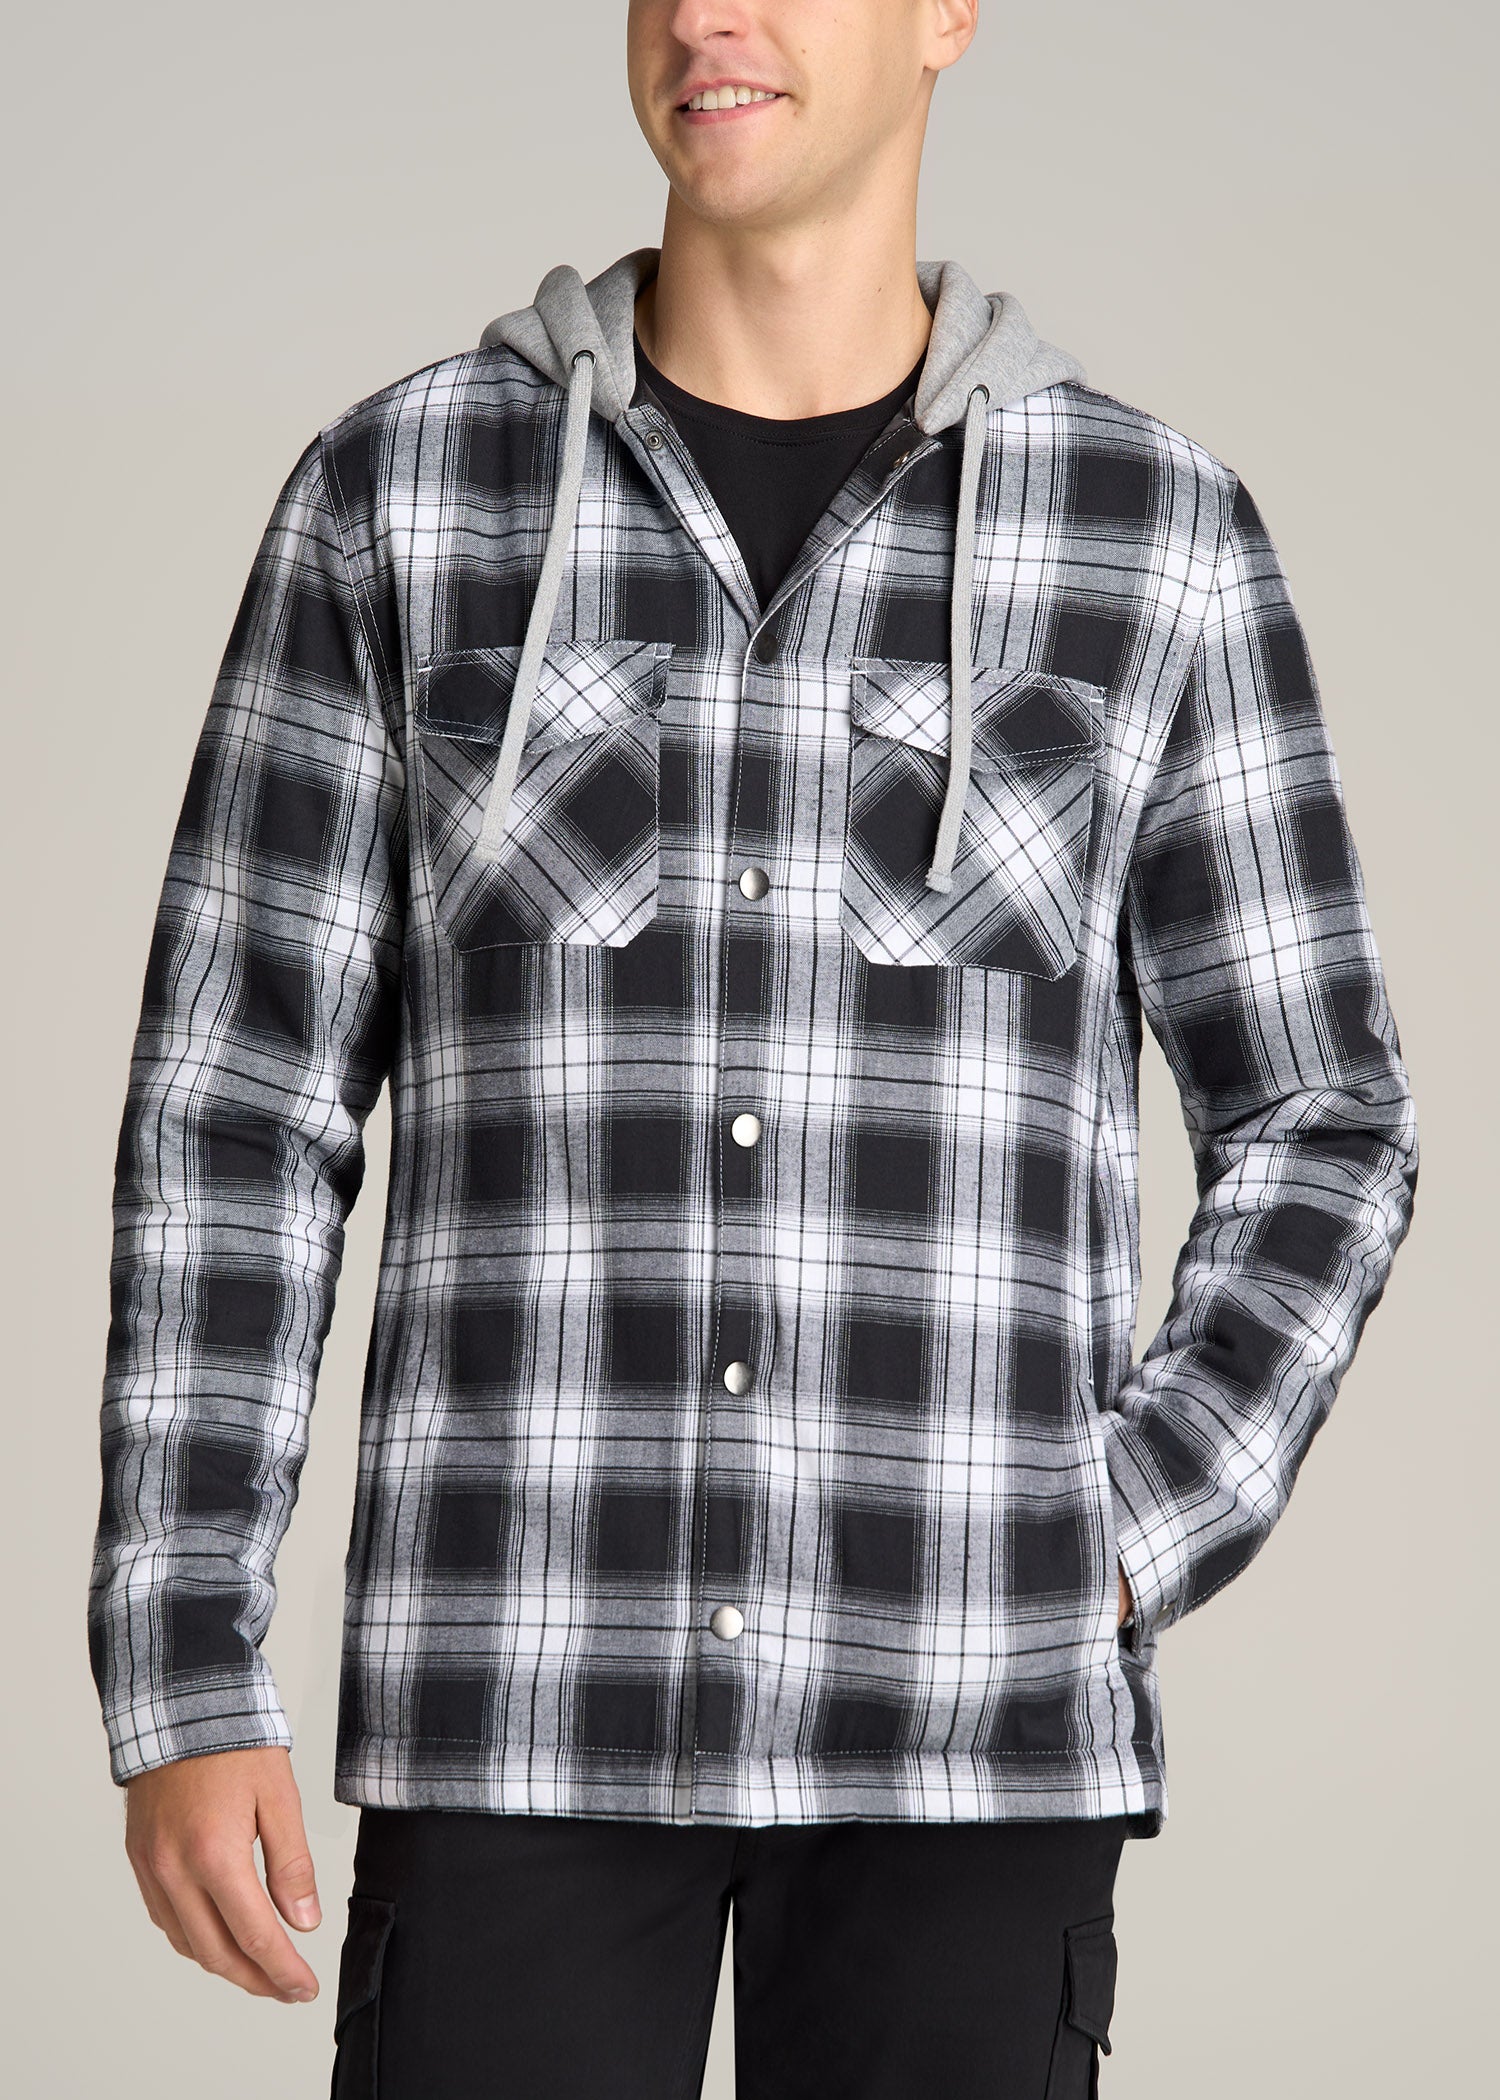 Hooded Flannel Shirt Jacket for Tall Men in Black & White Plaid XL / Tall / Black & White Plaid